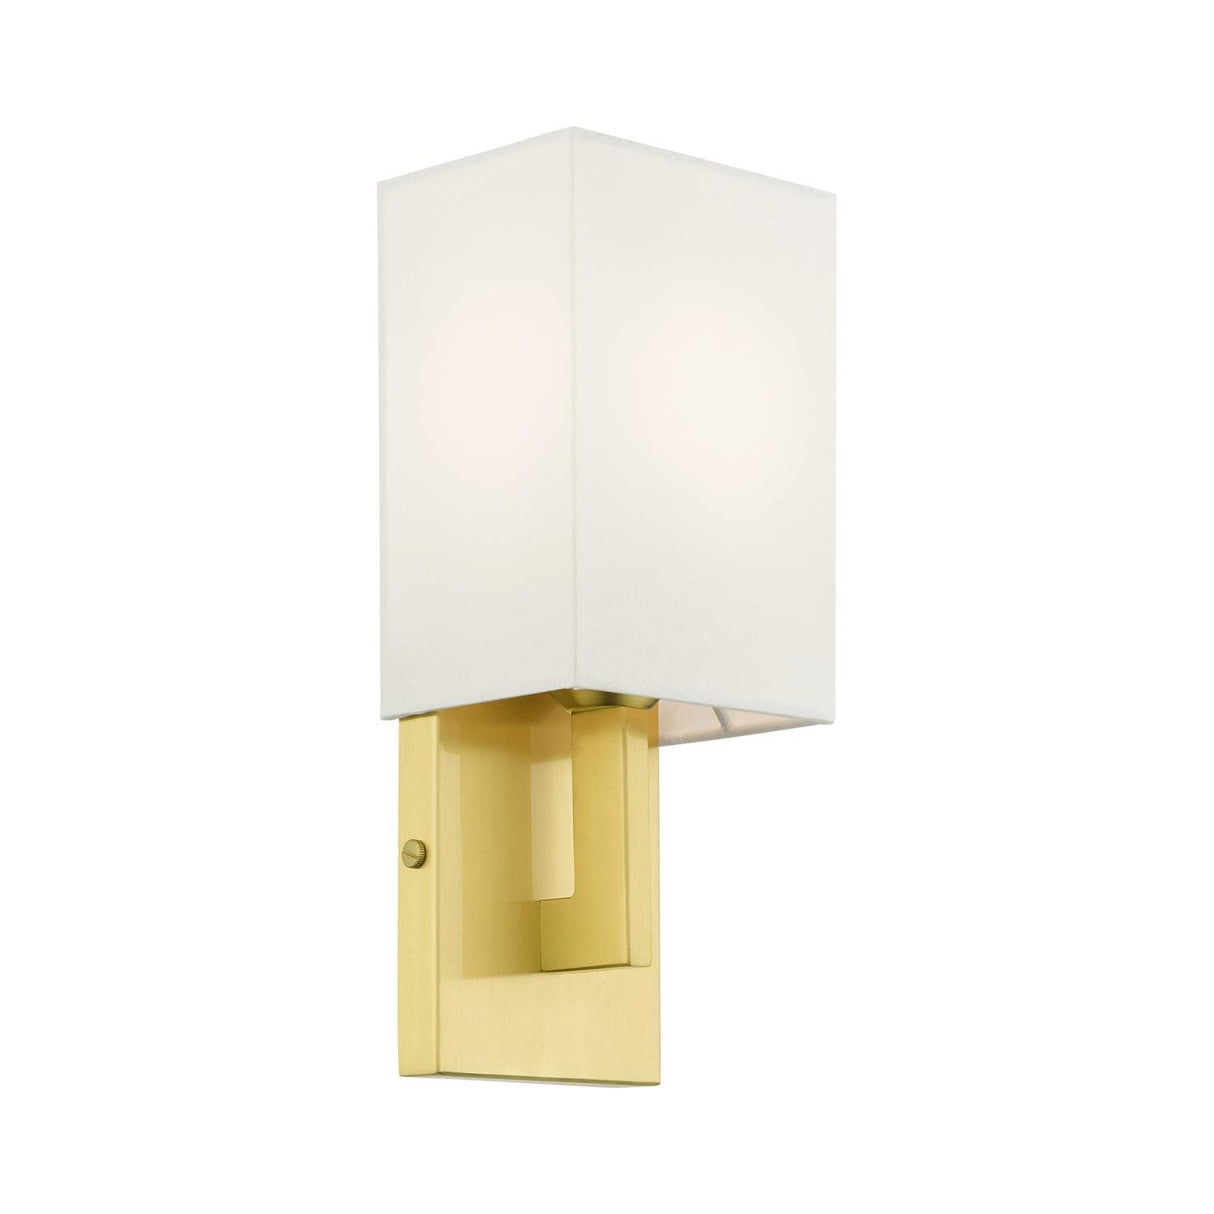 Livex Lighting 51101-12 Meridian Collection ADA 1-Light Wall Sconce Light with Off-White Hardback Fabric Shade, Satin Brass